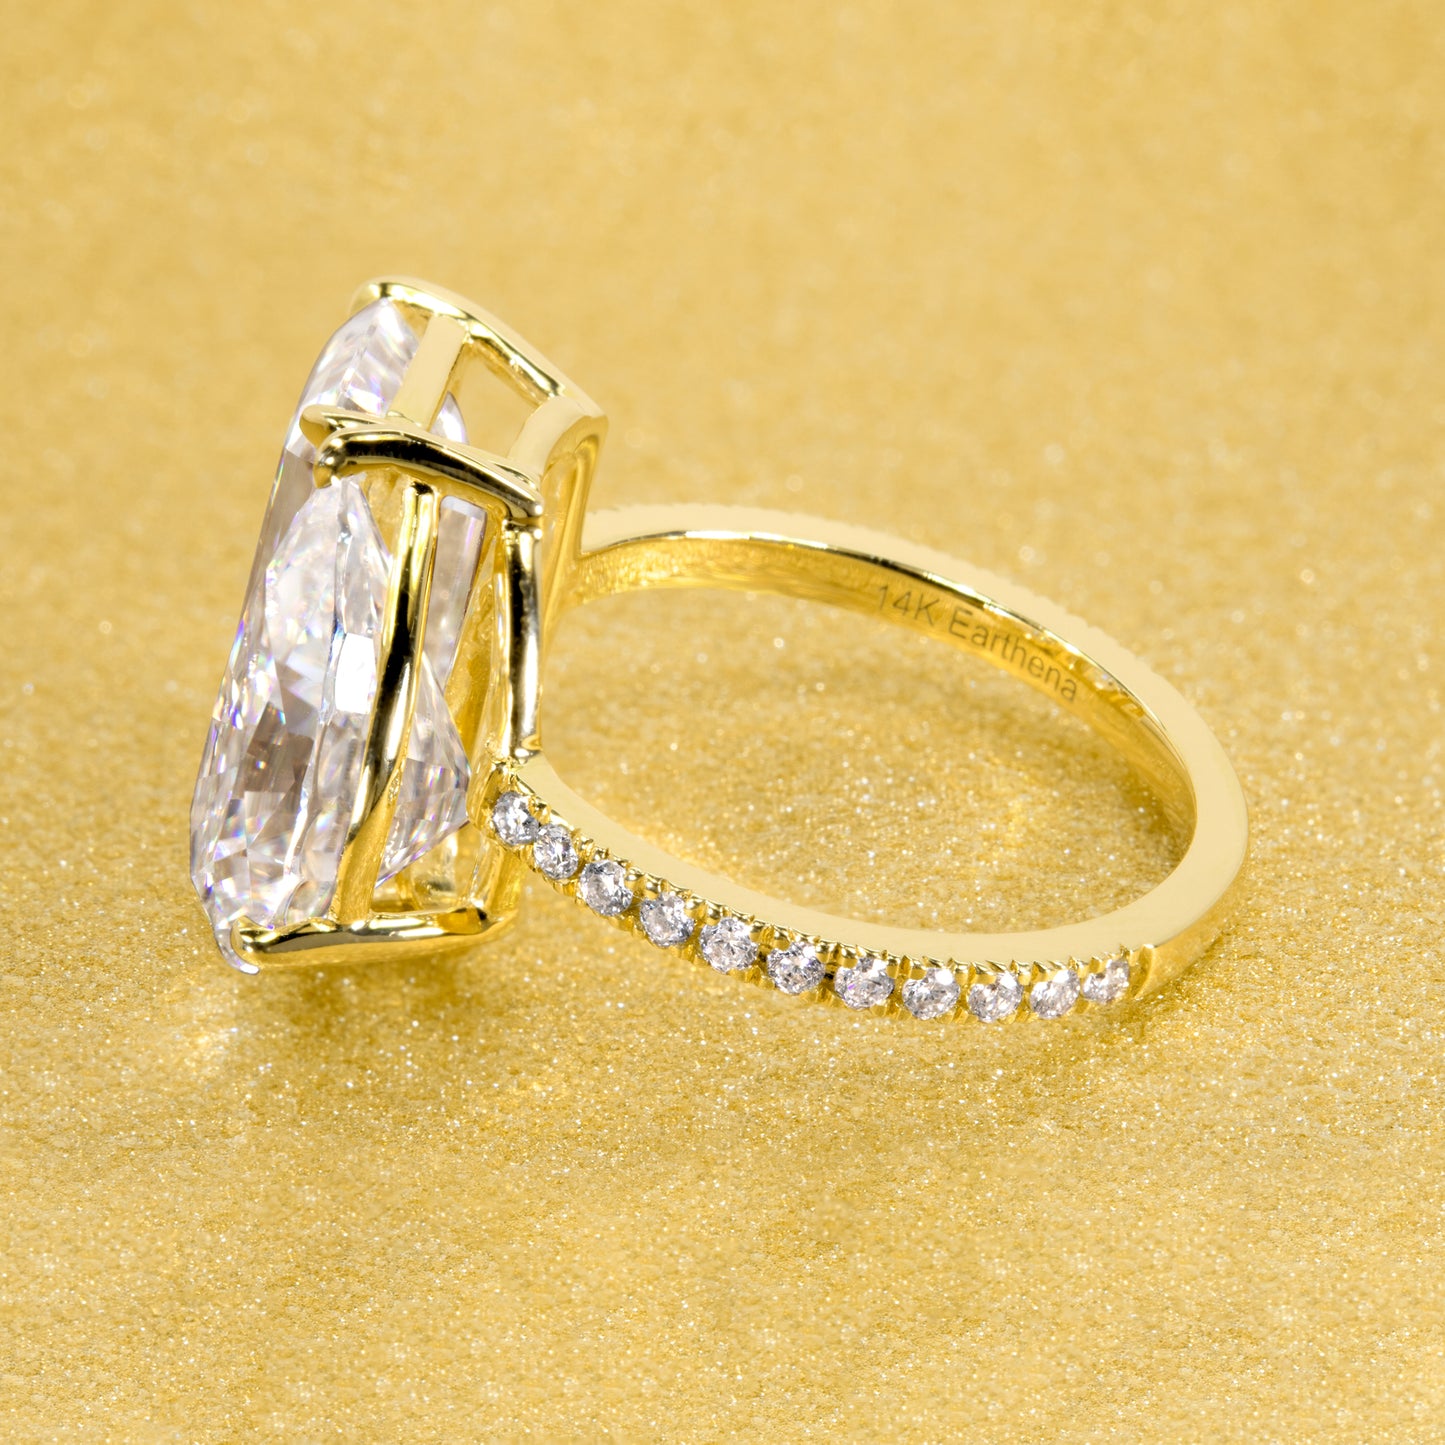 The Gemini, Toi et Moi 6 ctw Elongated Emerald-cut and Pear-shaped Moissanite and Lab-grown diamond Engagement Ring crafted in 14K or 18K gold by Earthena Jewelry